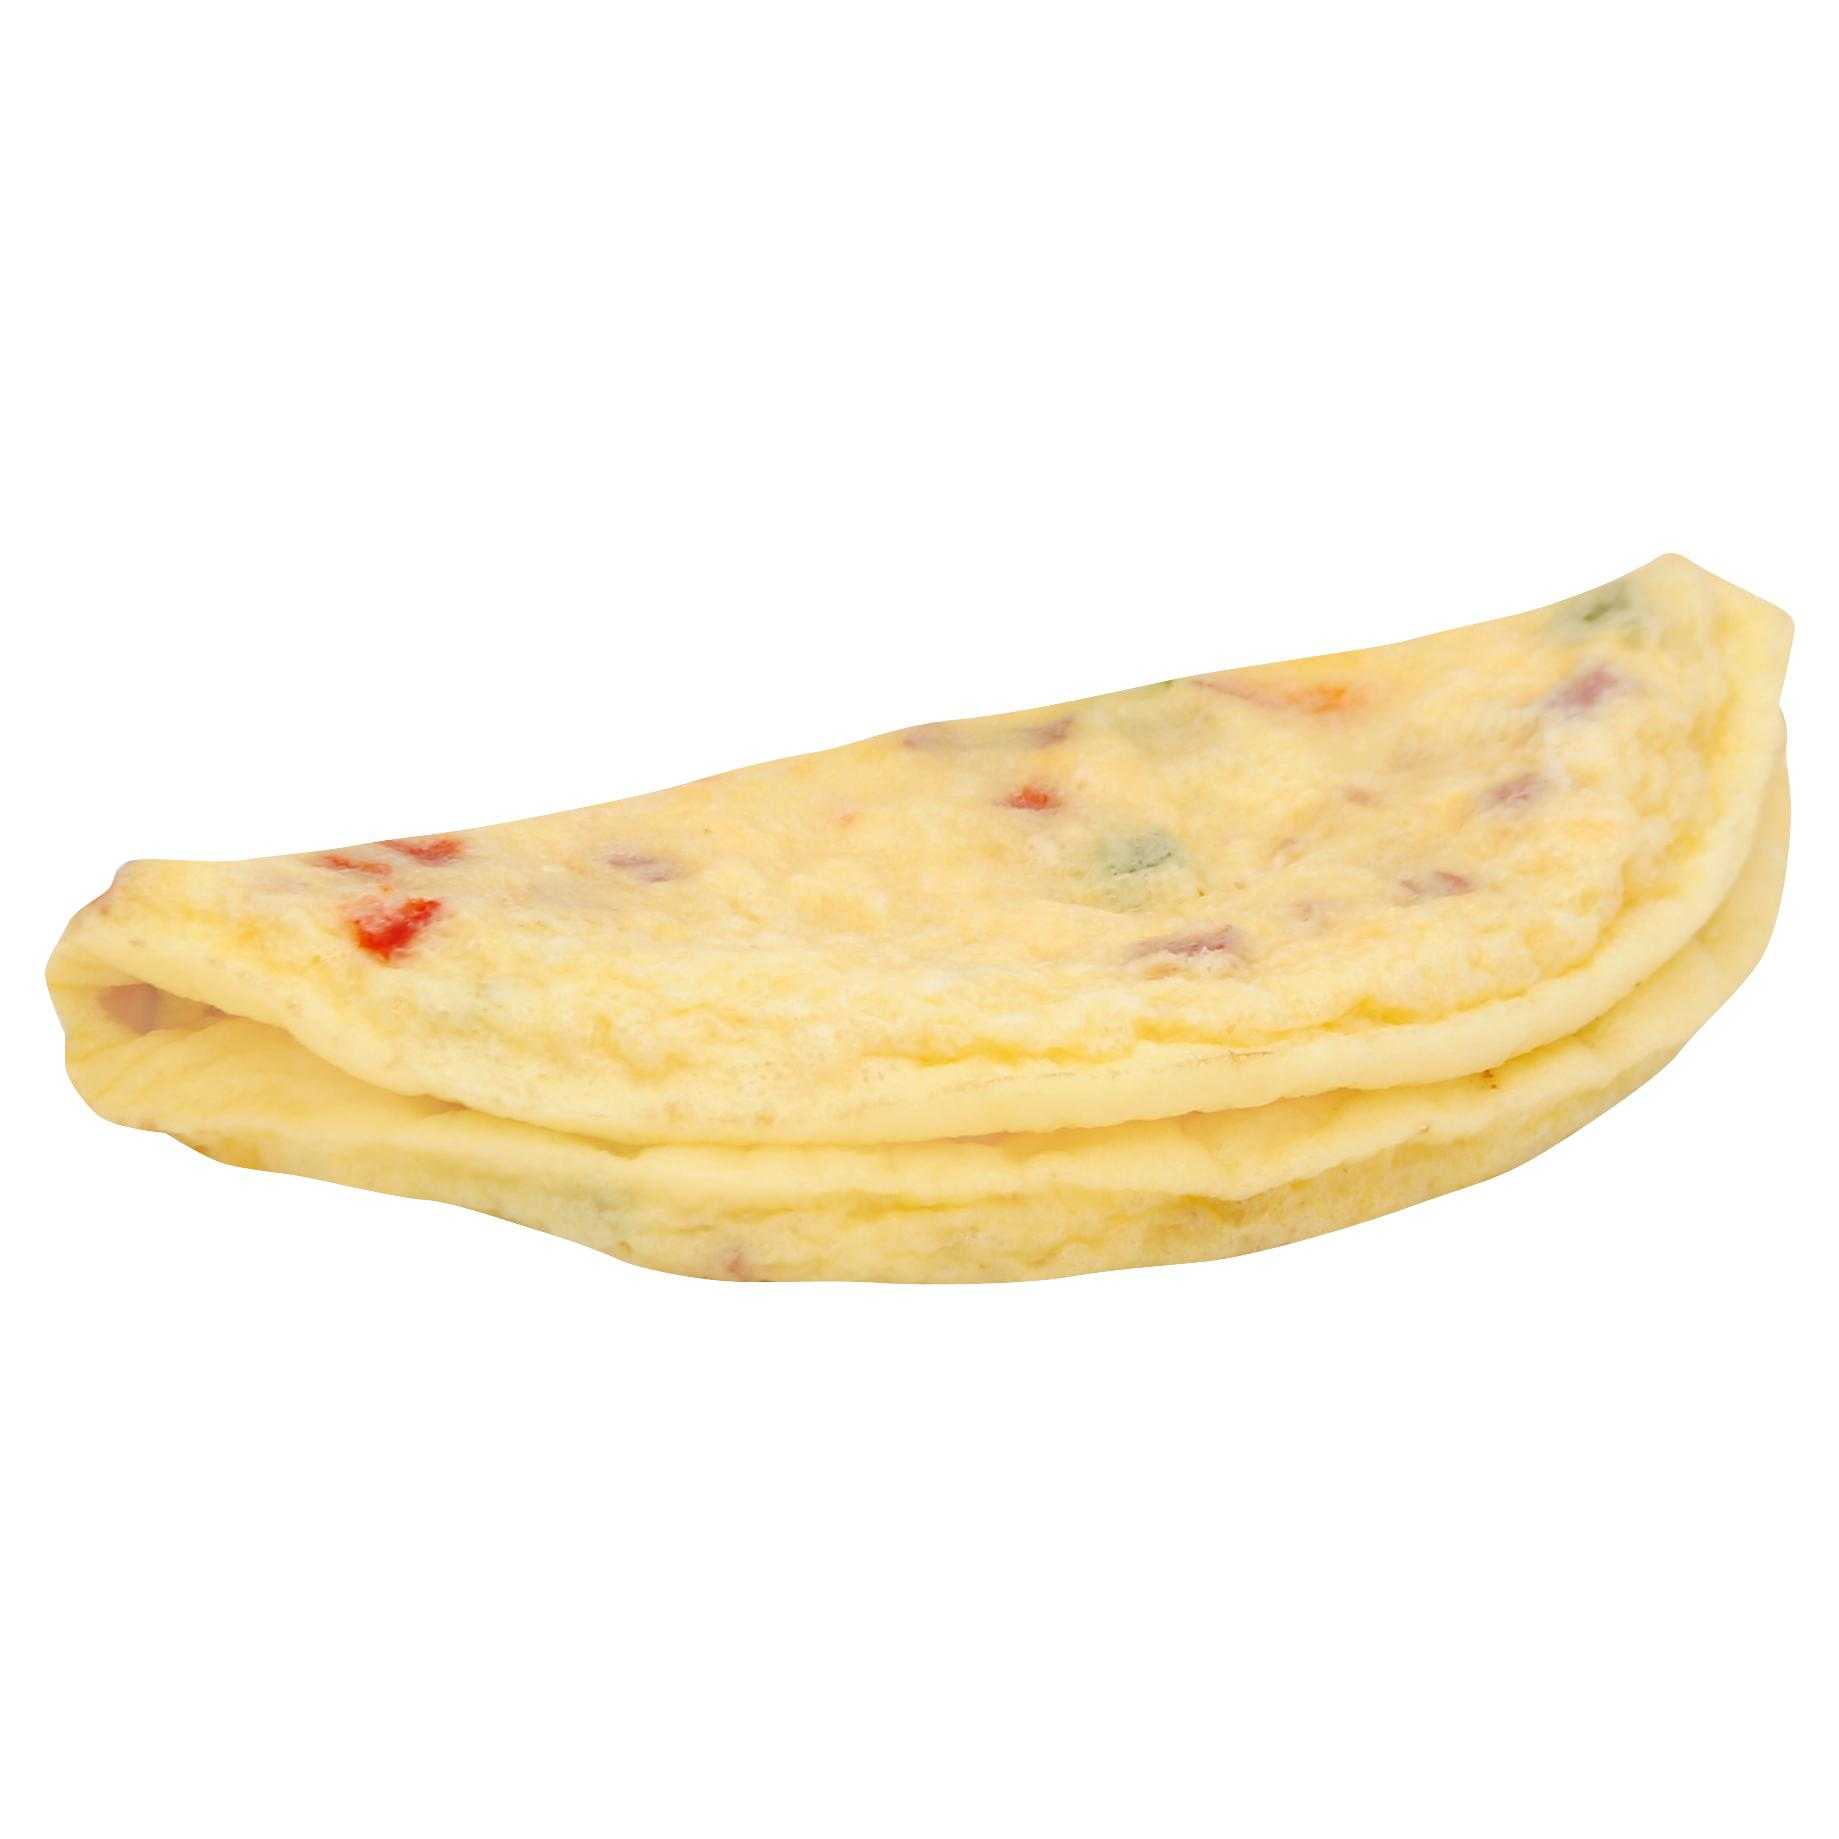 Papetti’s® Fully Cooked 4.75” x 2.25” Fold Frittata Egg Patties with Cheddar Cheese, Ham, Onions and Red & Green Pepper, 48/3 oz